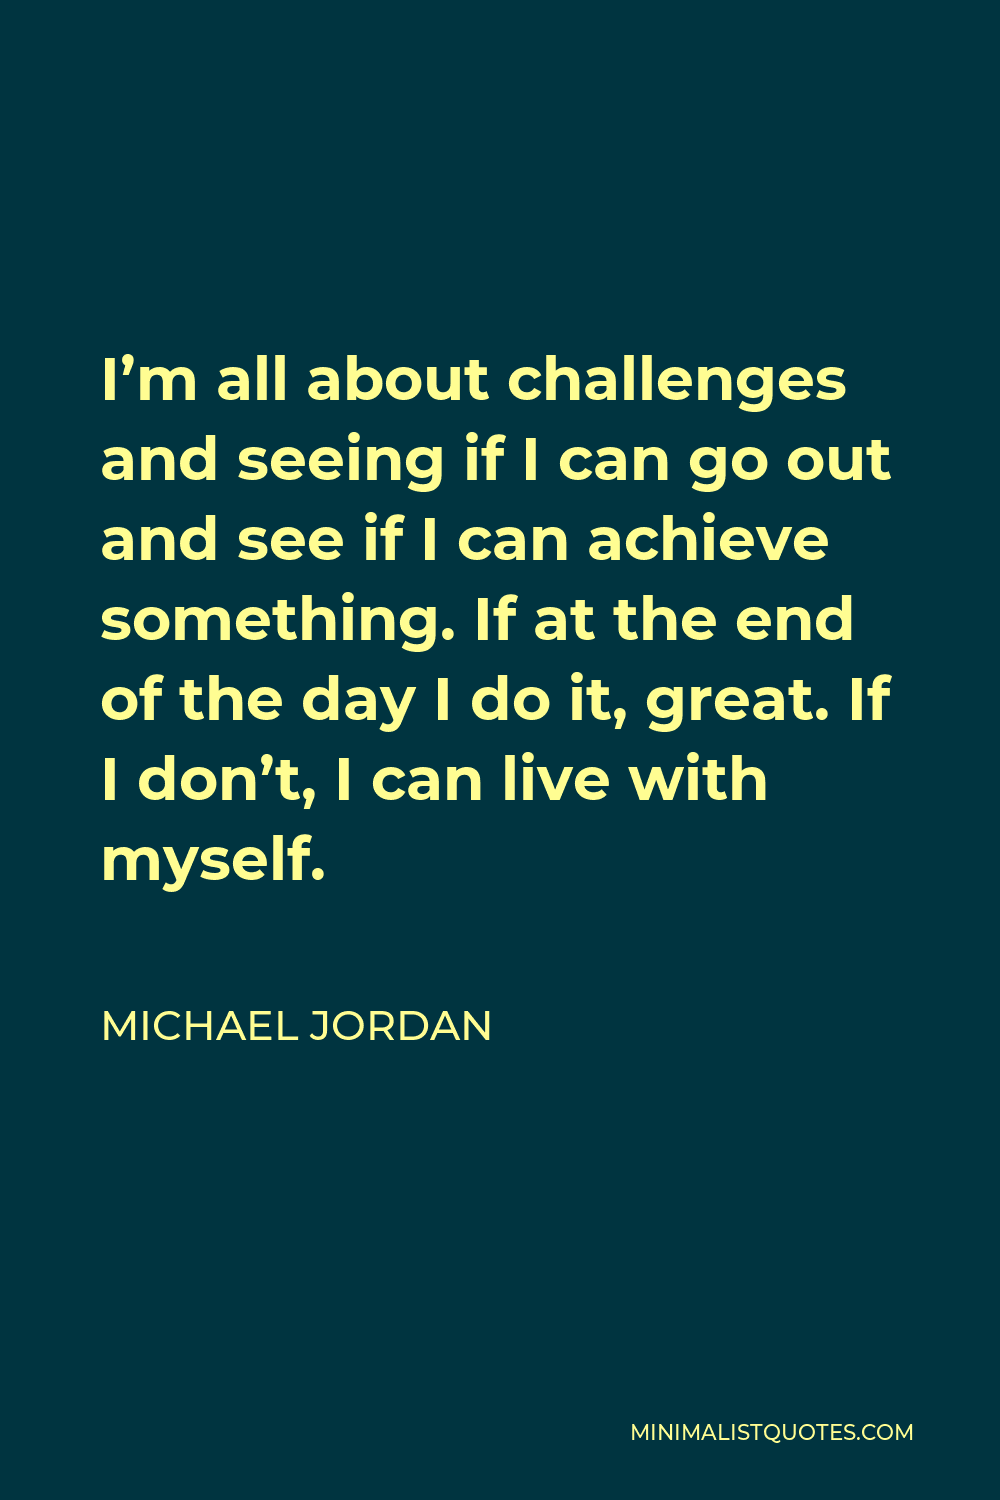 Michael Jordan quote: I'm a firm believer in goal setting. Step by